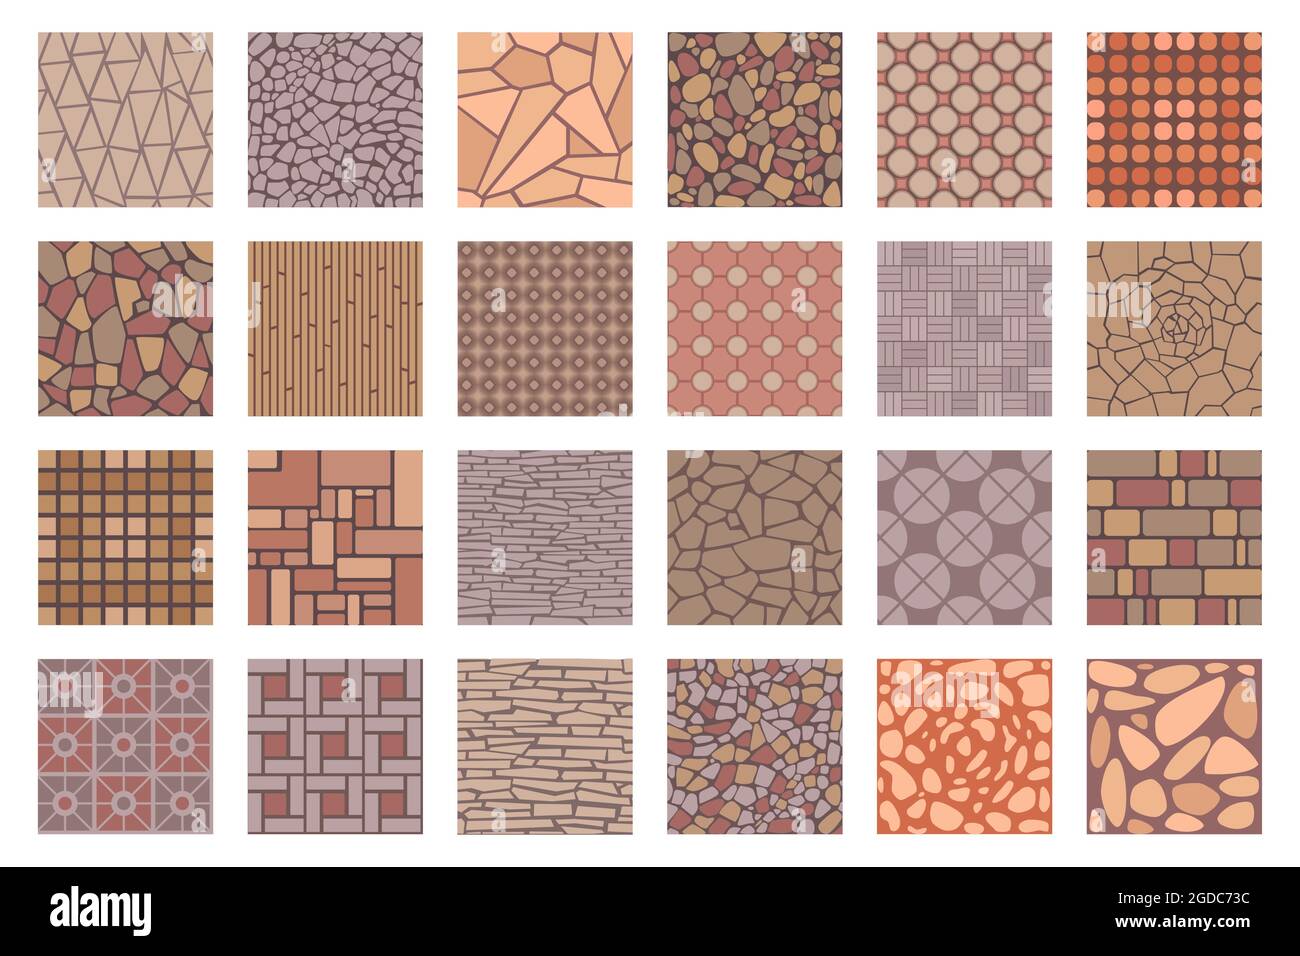 Street road pavements tile patterns top view. Floor tiles with rock, brick and cobble stone texture. Paved patio or park sidewalk vector set Stock Vector